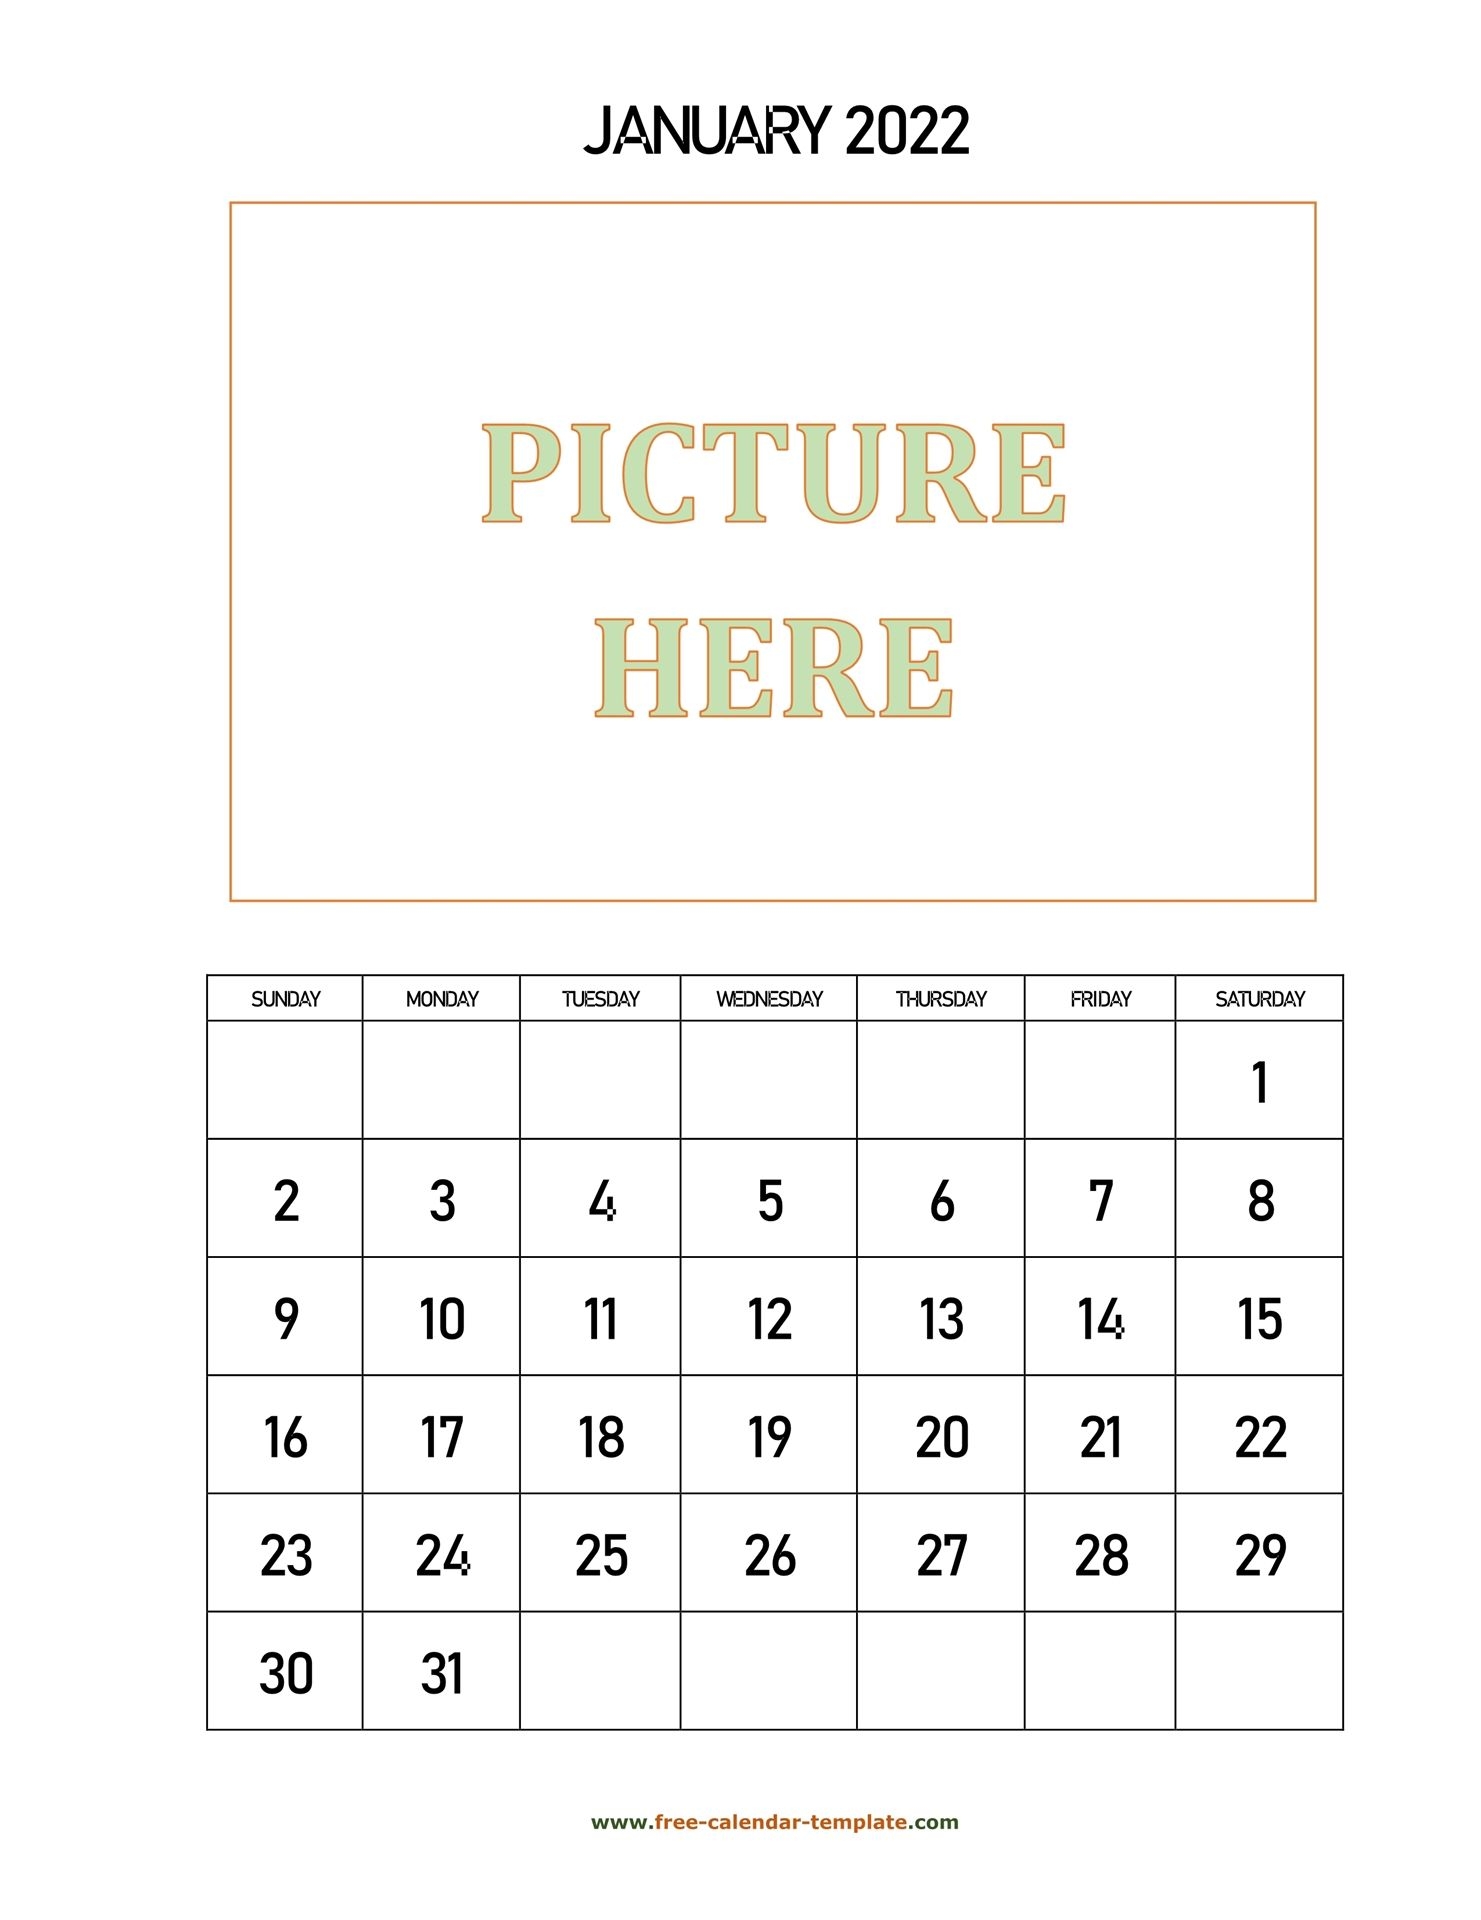 Monthly Printable 2022 Calendar, Space For Add Picture